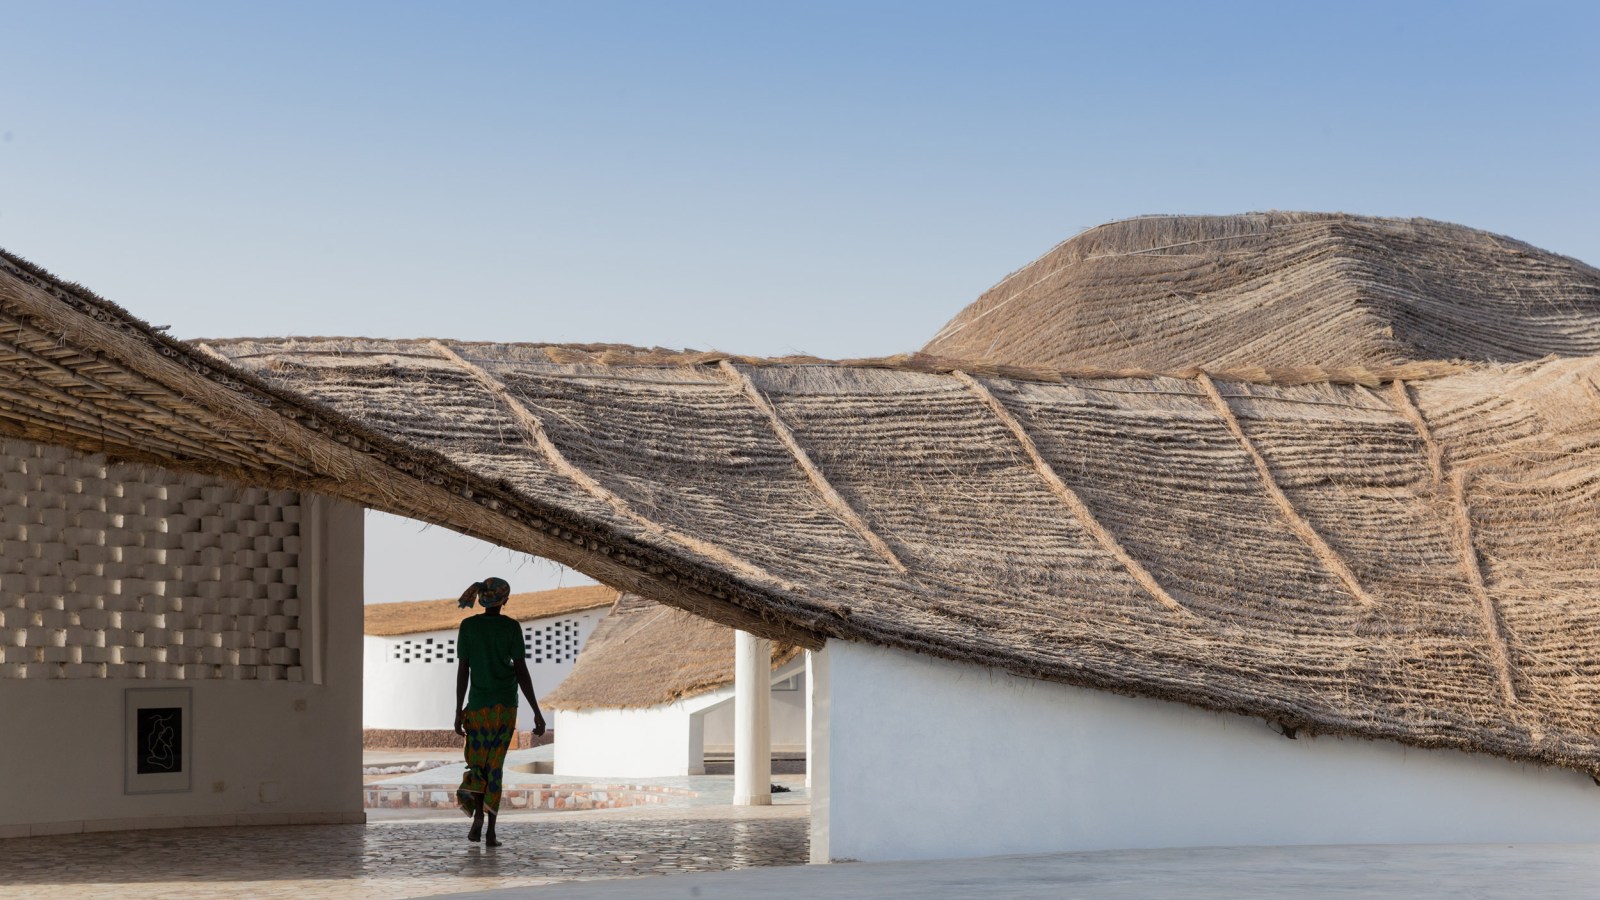 Mori's THREAD: Artists’ Residency and Cultural Center in Senegal. Photo by Iwan Baan